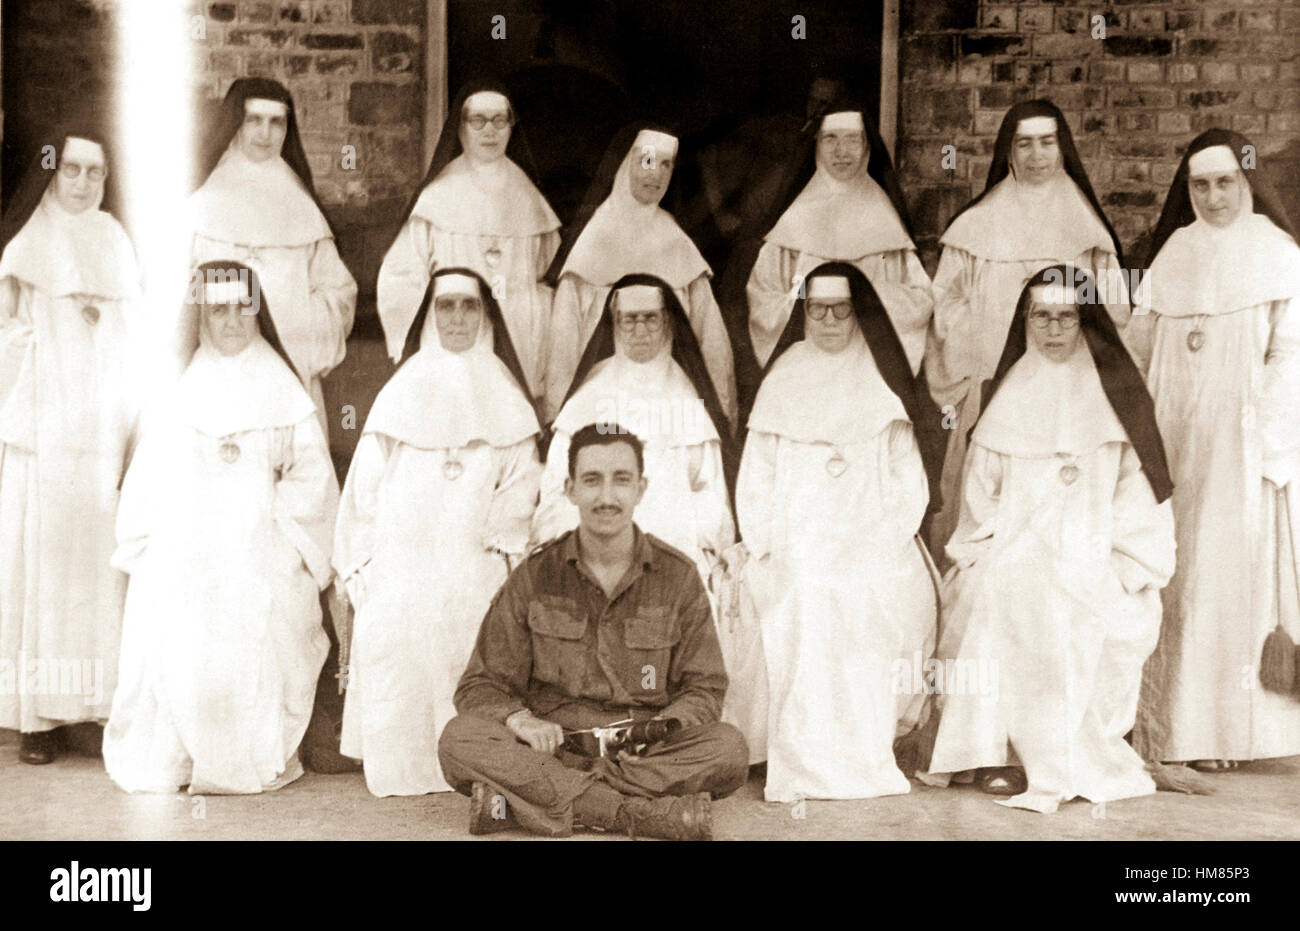 'The Fighting Irish', Good Shepherd Convent. Thirteen Irish nuns who had been interned in the Rangoon City Jail by the Japanese, but were later released as neutrals.  Burma, May 28, 1945.  Attributed to Cpl. Rodney C. Ferguson. (OSS) NARA FILE #:  226-FPK-15-1 WAR & CONFLICT BOOK #:  1270 Stock Photo